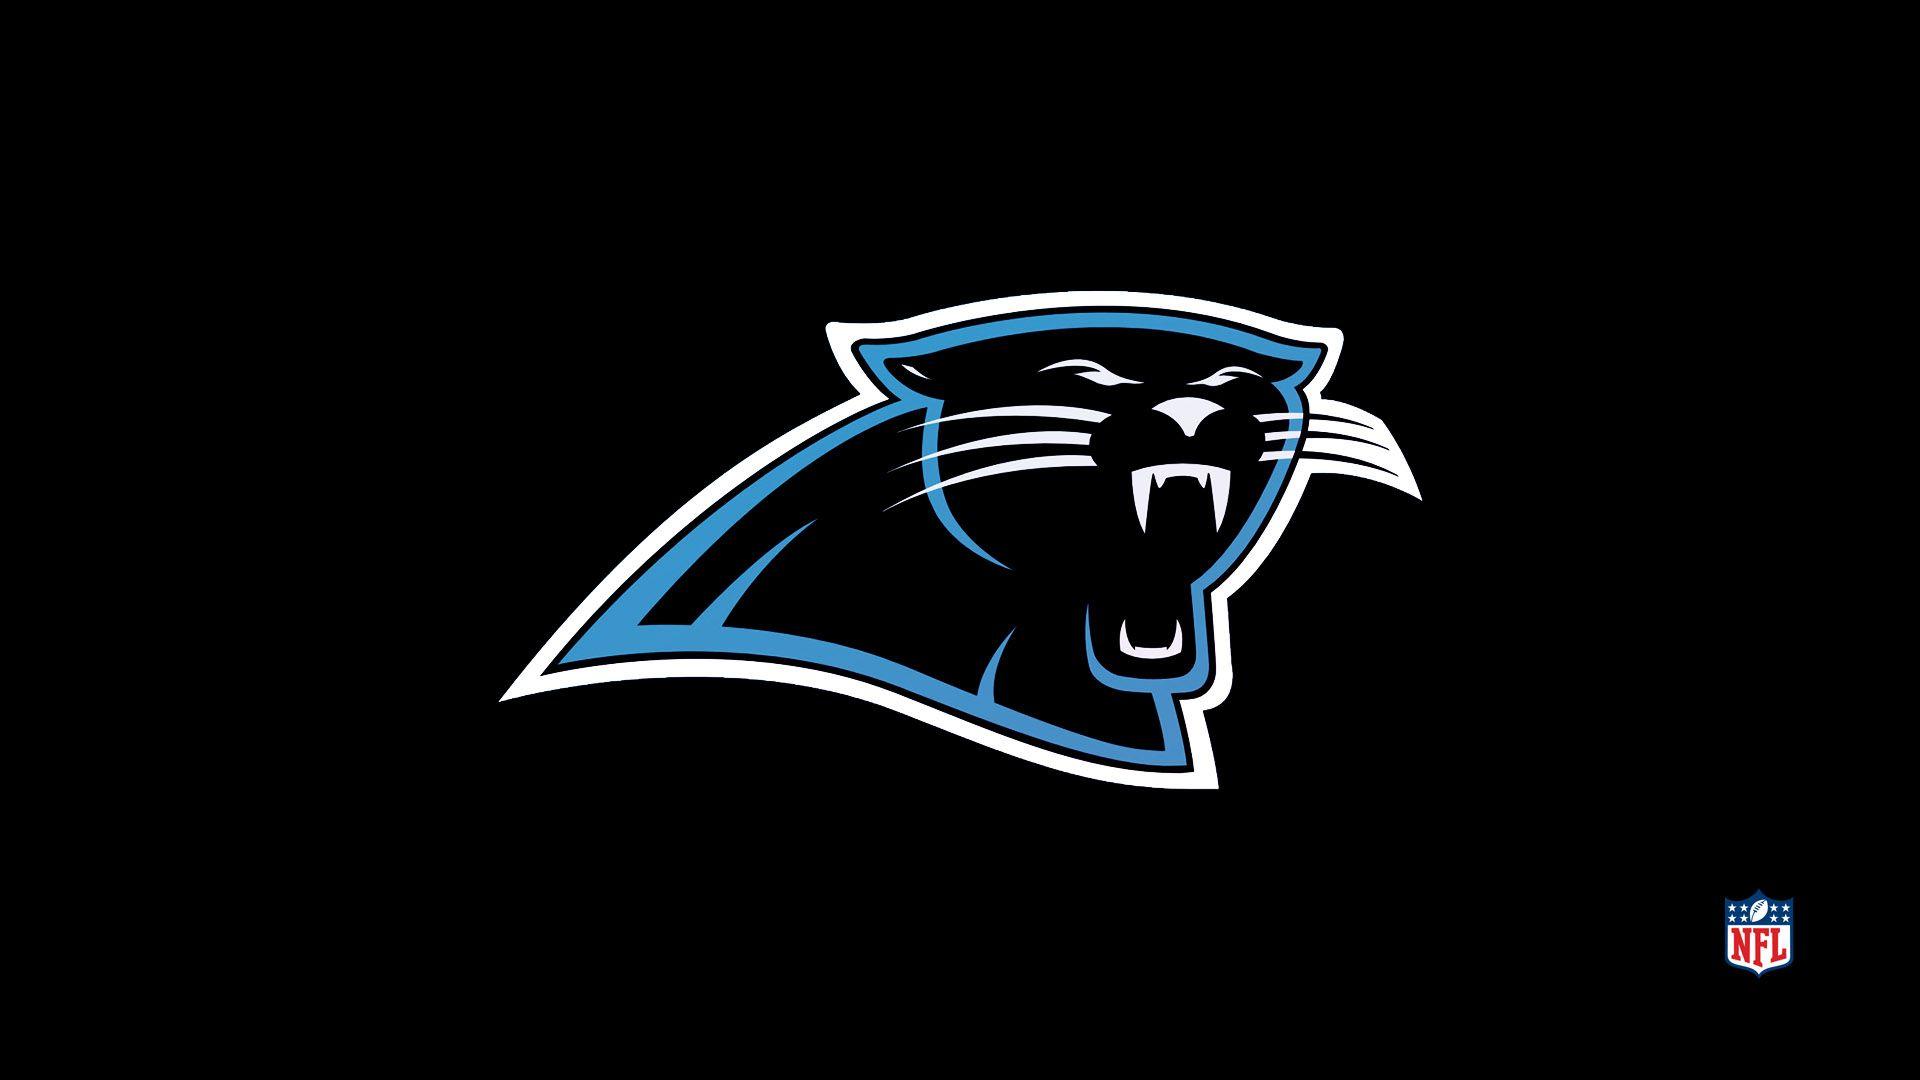 Carolina Panthers Wallpaper Wallpaper Background of Your Choice